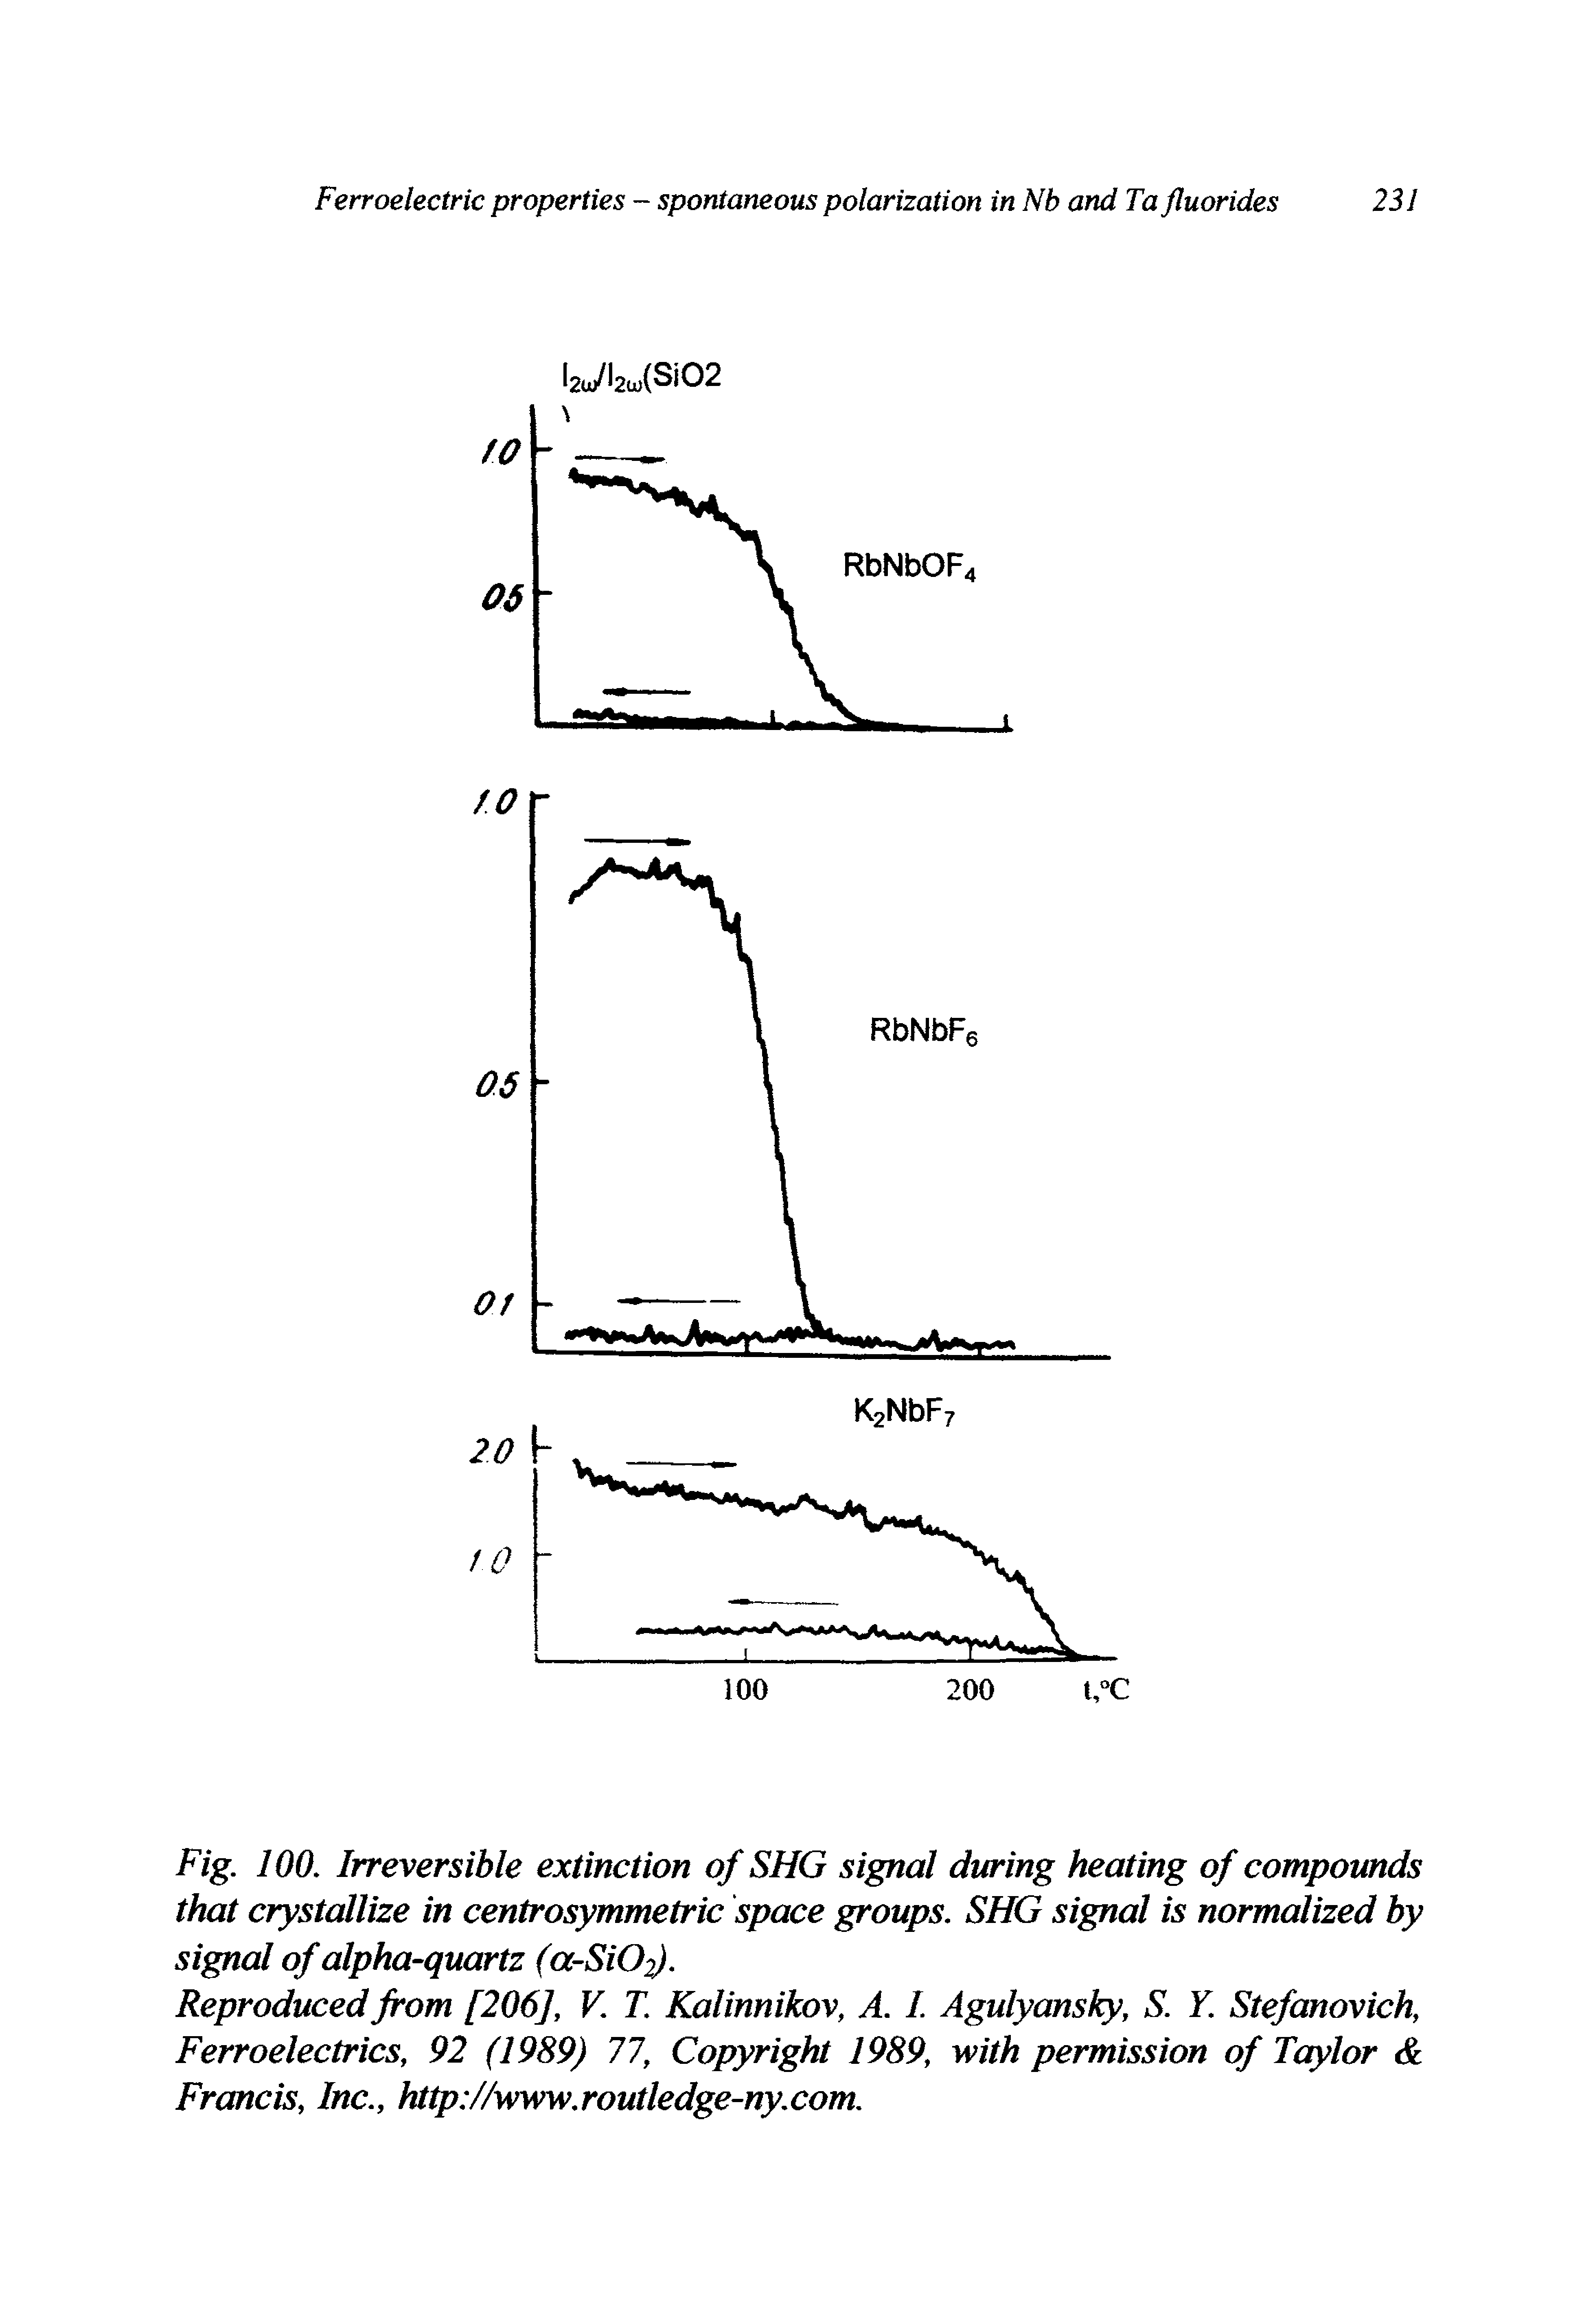 Fig. 100. Irreversible extinction of SHG signal during heating of compounds that crystallize in centrosymmetric space groups. SHG signal is normalized by signal of alpha-quartz (a-SiO/f.